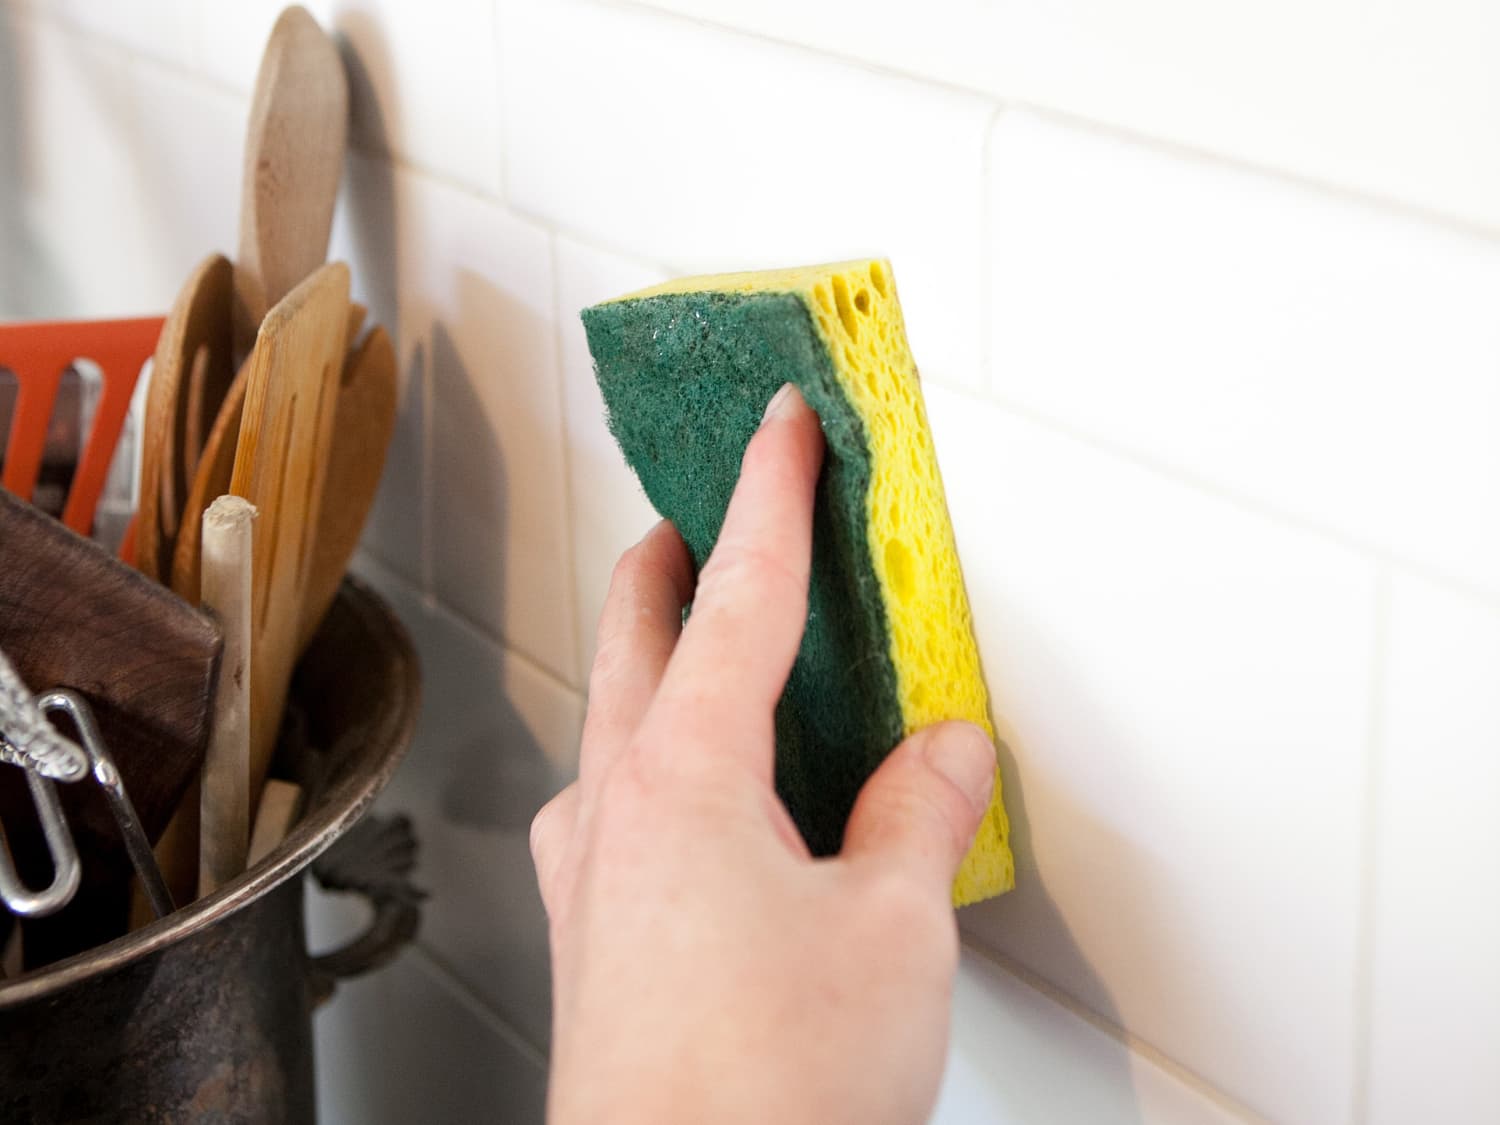 How To Clean Greasy Walls, Backsplashes, and Cabinets